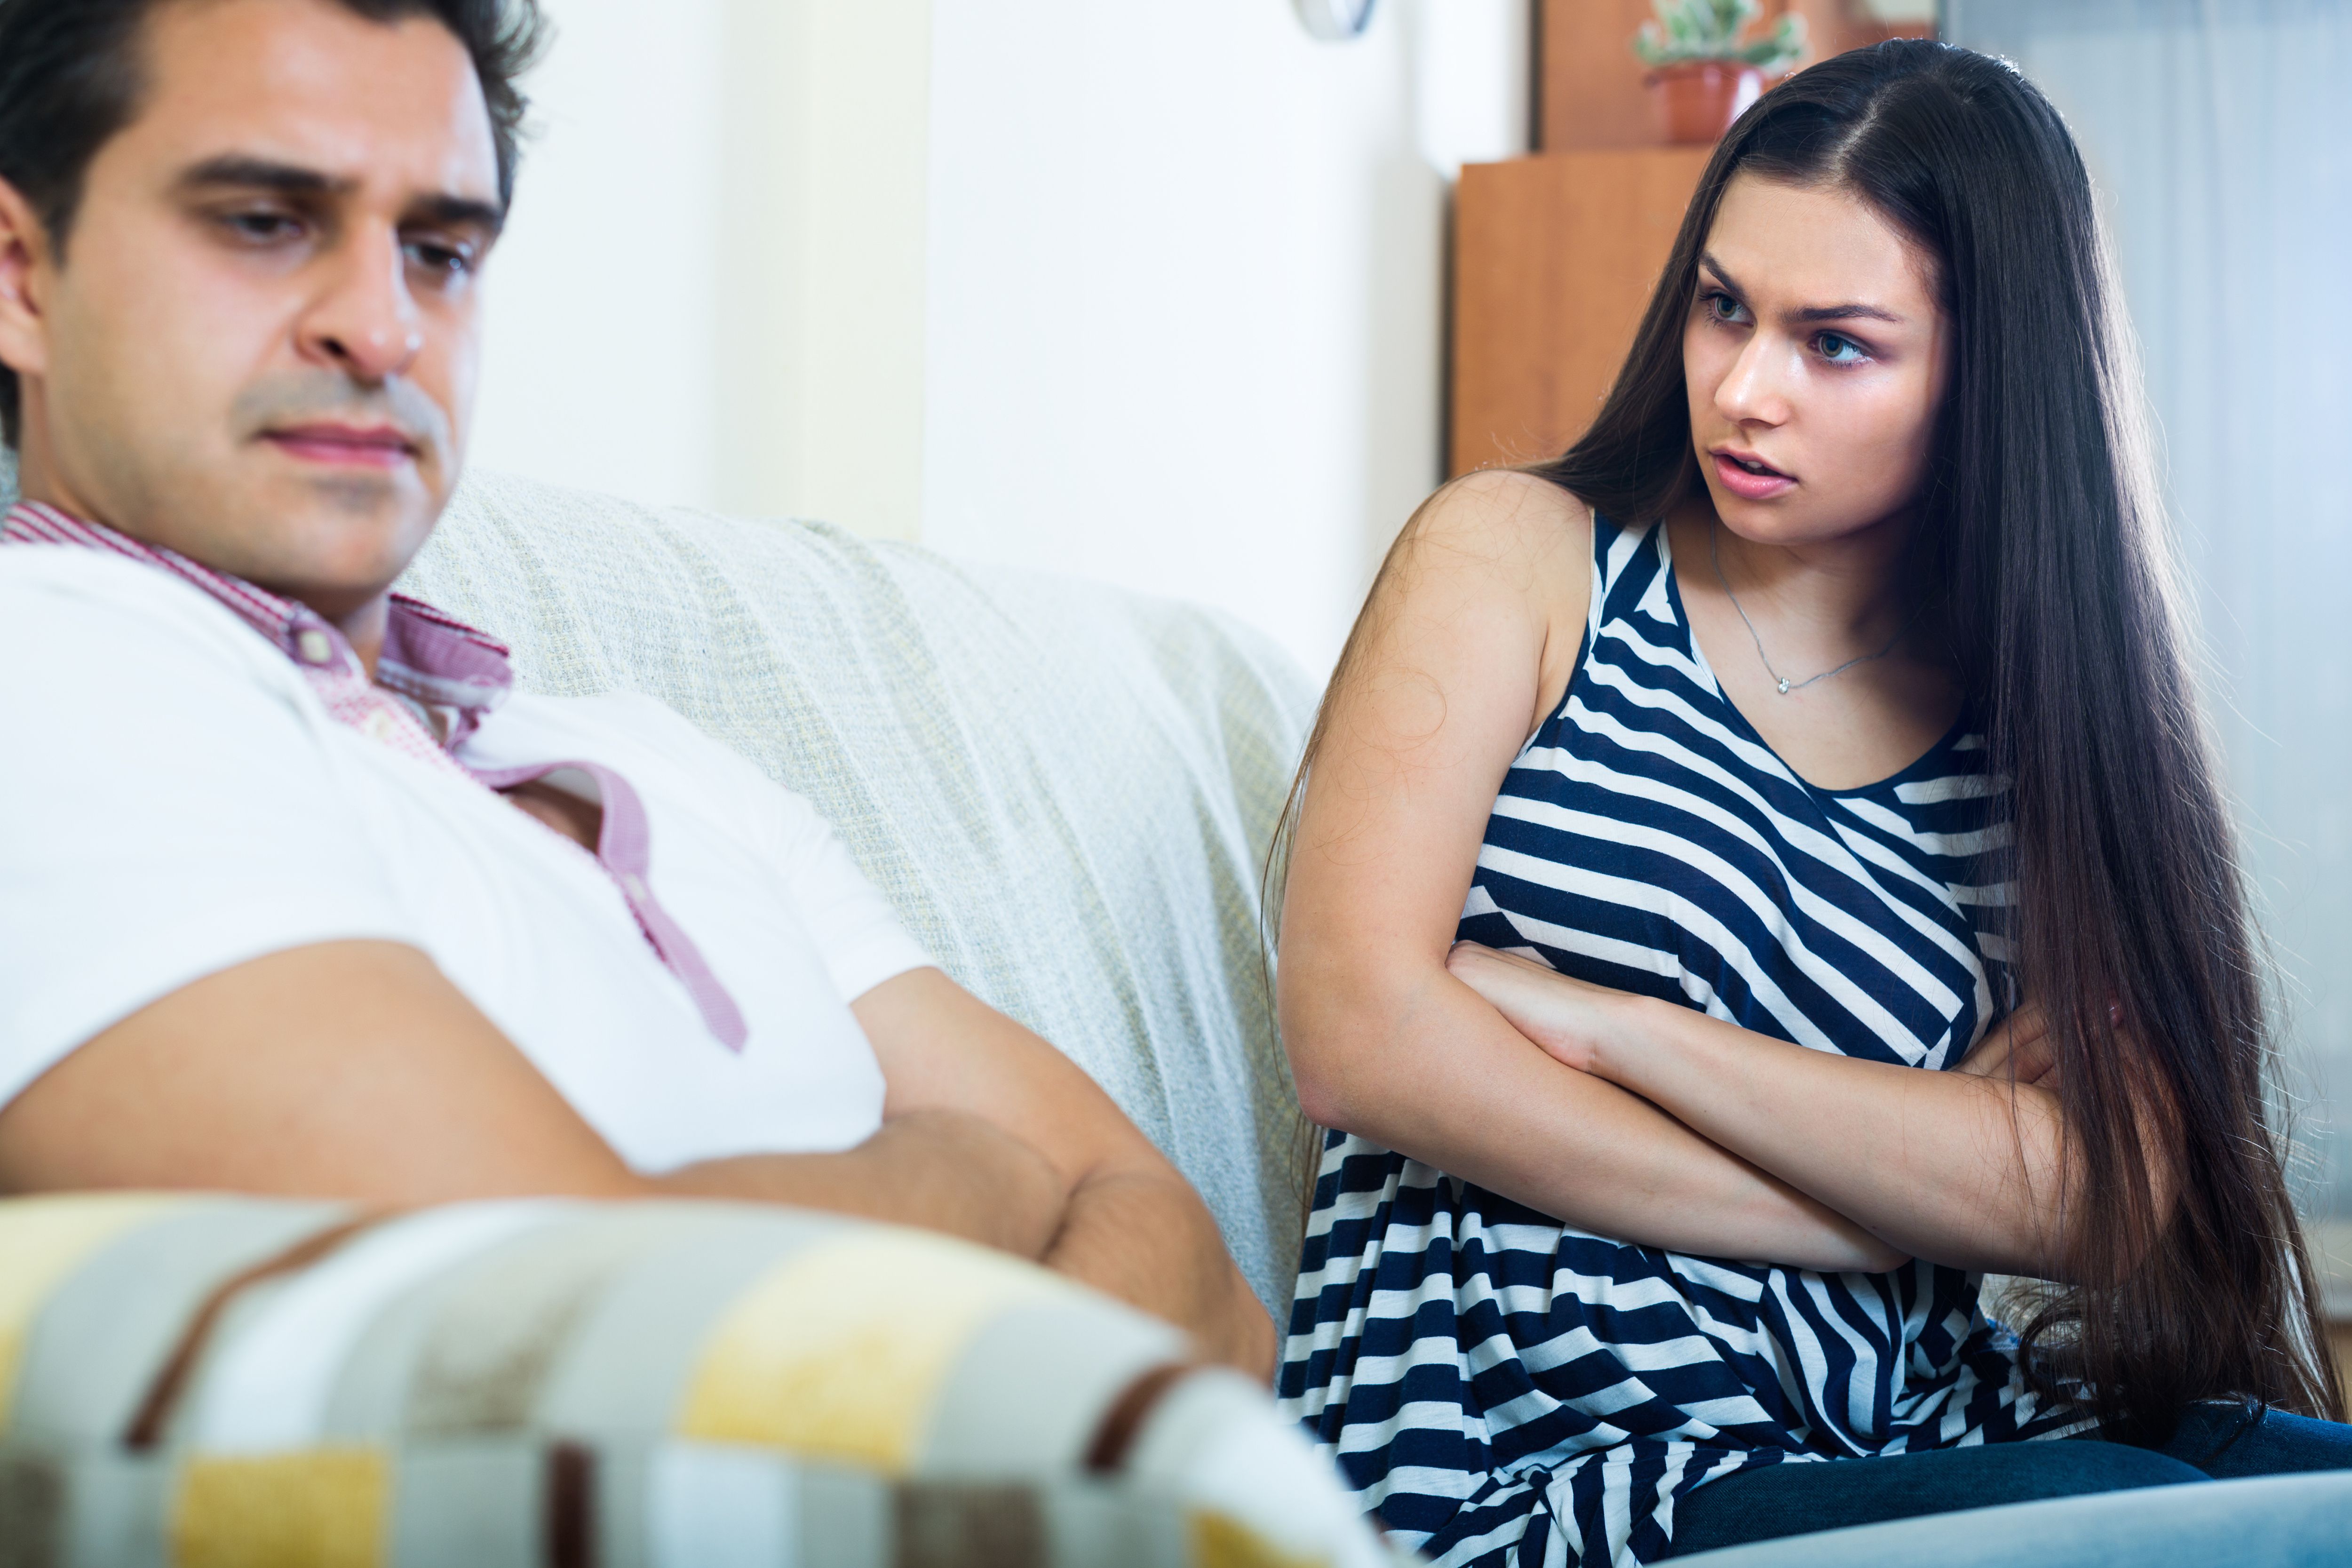 A woman looks upset at her man. | Source: Shutterstock